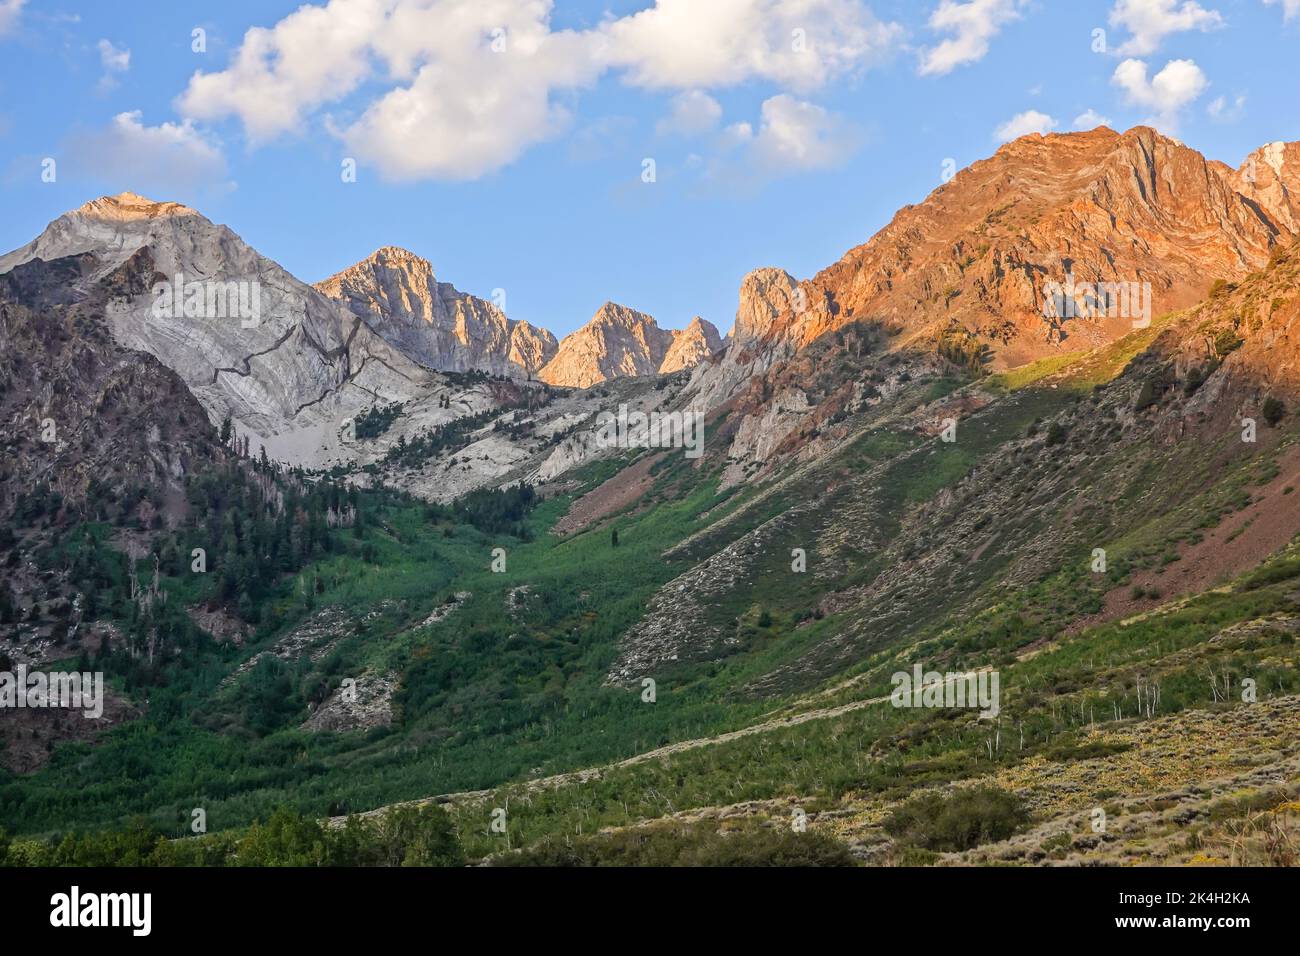 The McGee Canyon area of the John Muir Wilderness California. With the Eastern Sierra Nevada Mountains peaks rising in the background. early morning Stock Photo